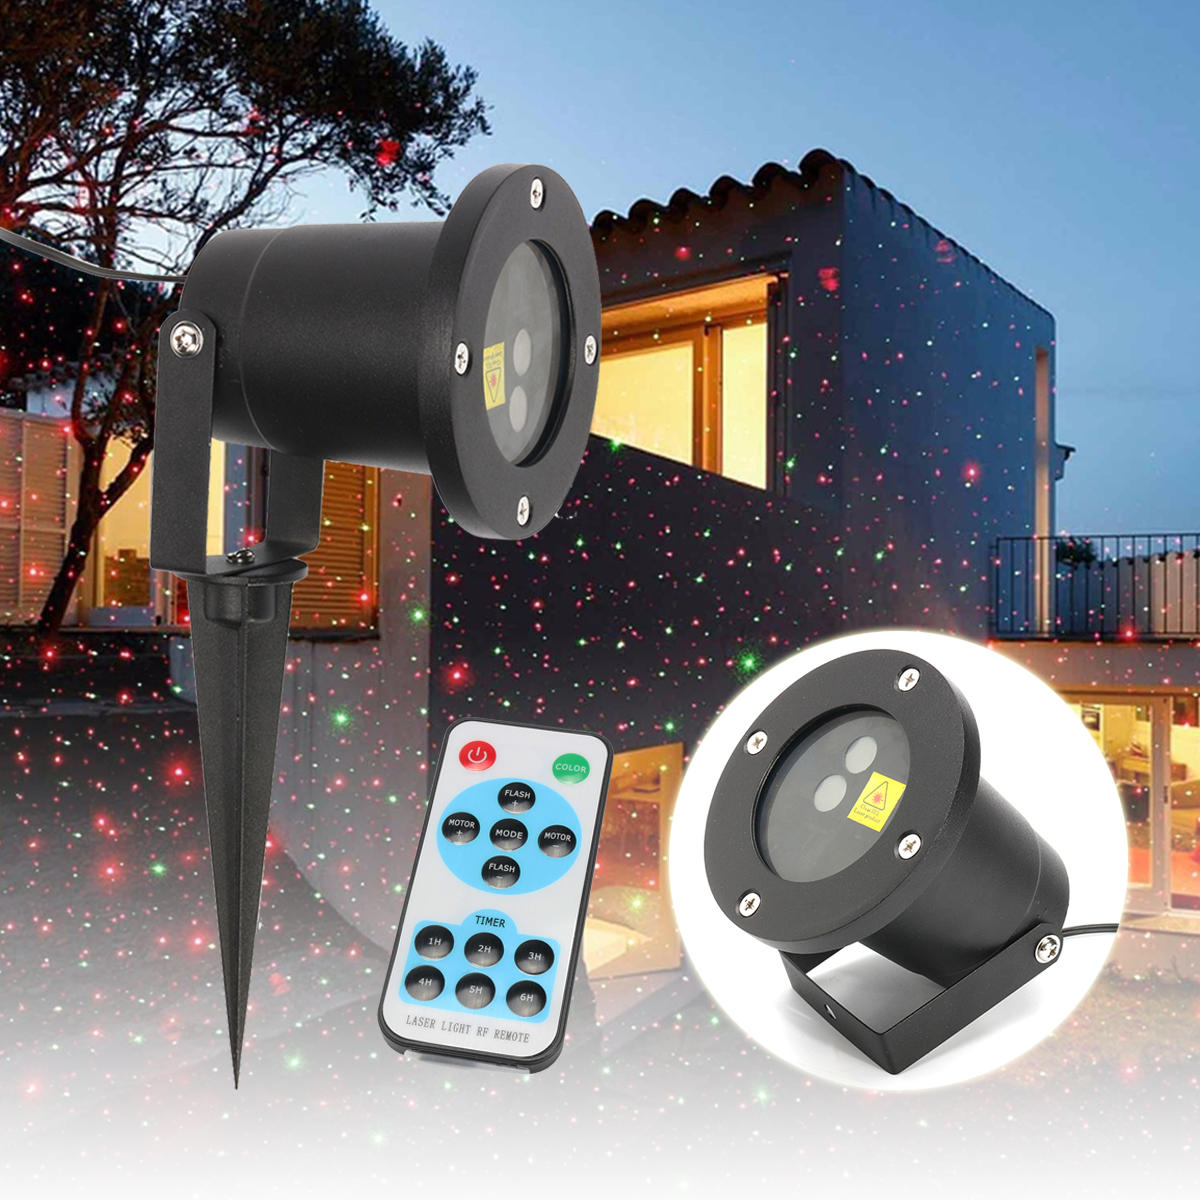 Christmas Star Projector Stage Light Waterproof R&G Laser LED Remote Control Outdoor Landscape Lamp Christmas Decoration